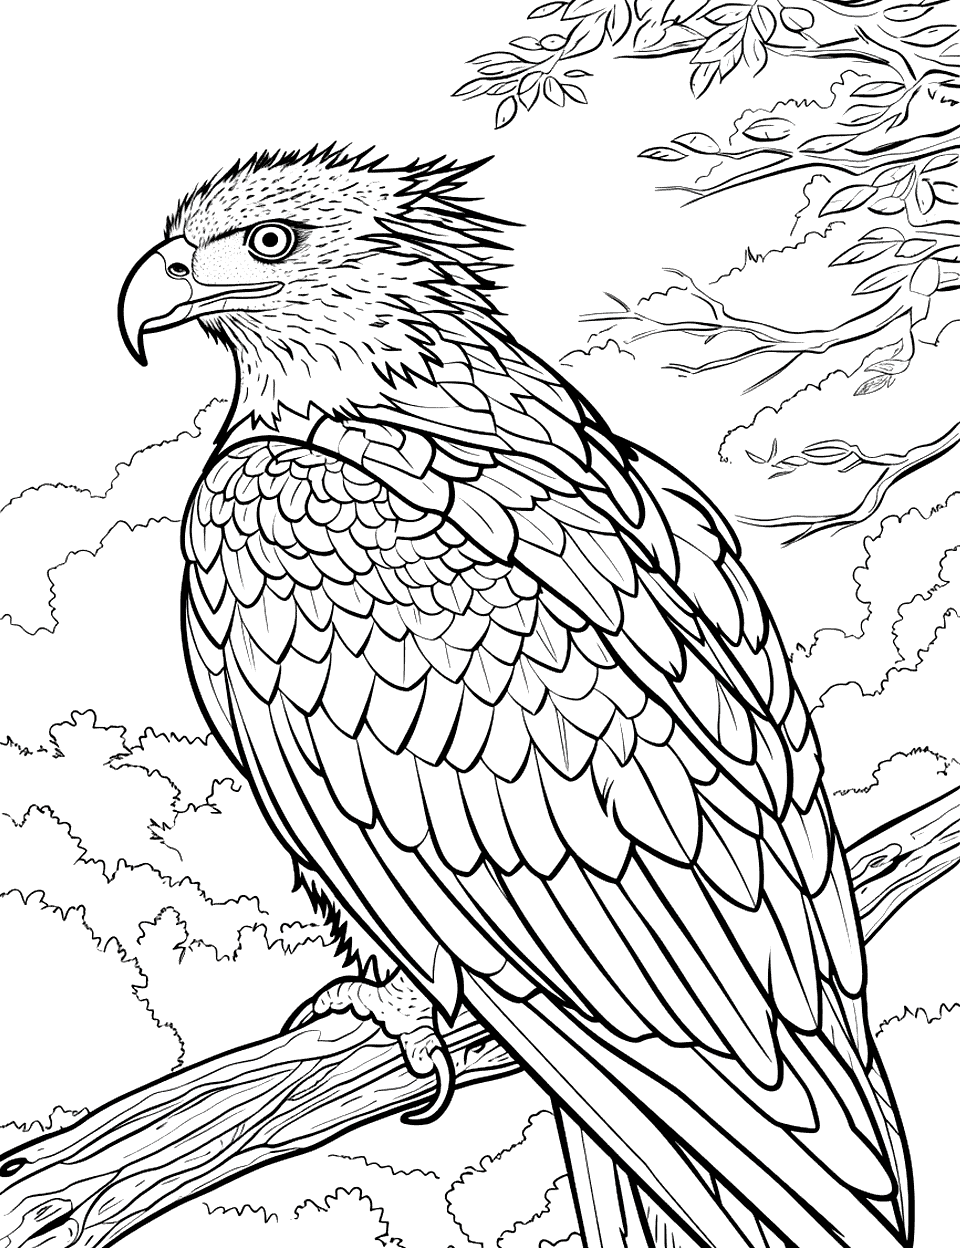 Crowned Eagle in a Sparse Jungle Coloring Page - A crowned eagle perches on a branch in a jungle, looking regal and alert.